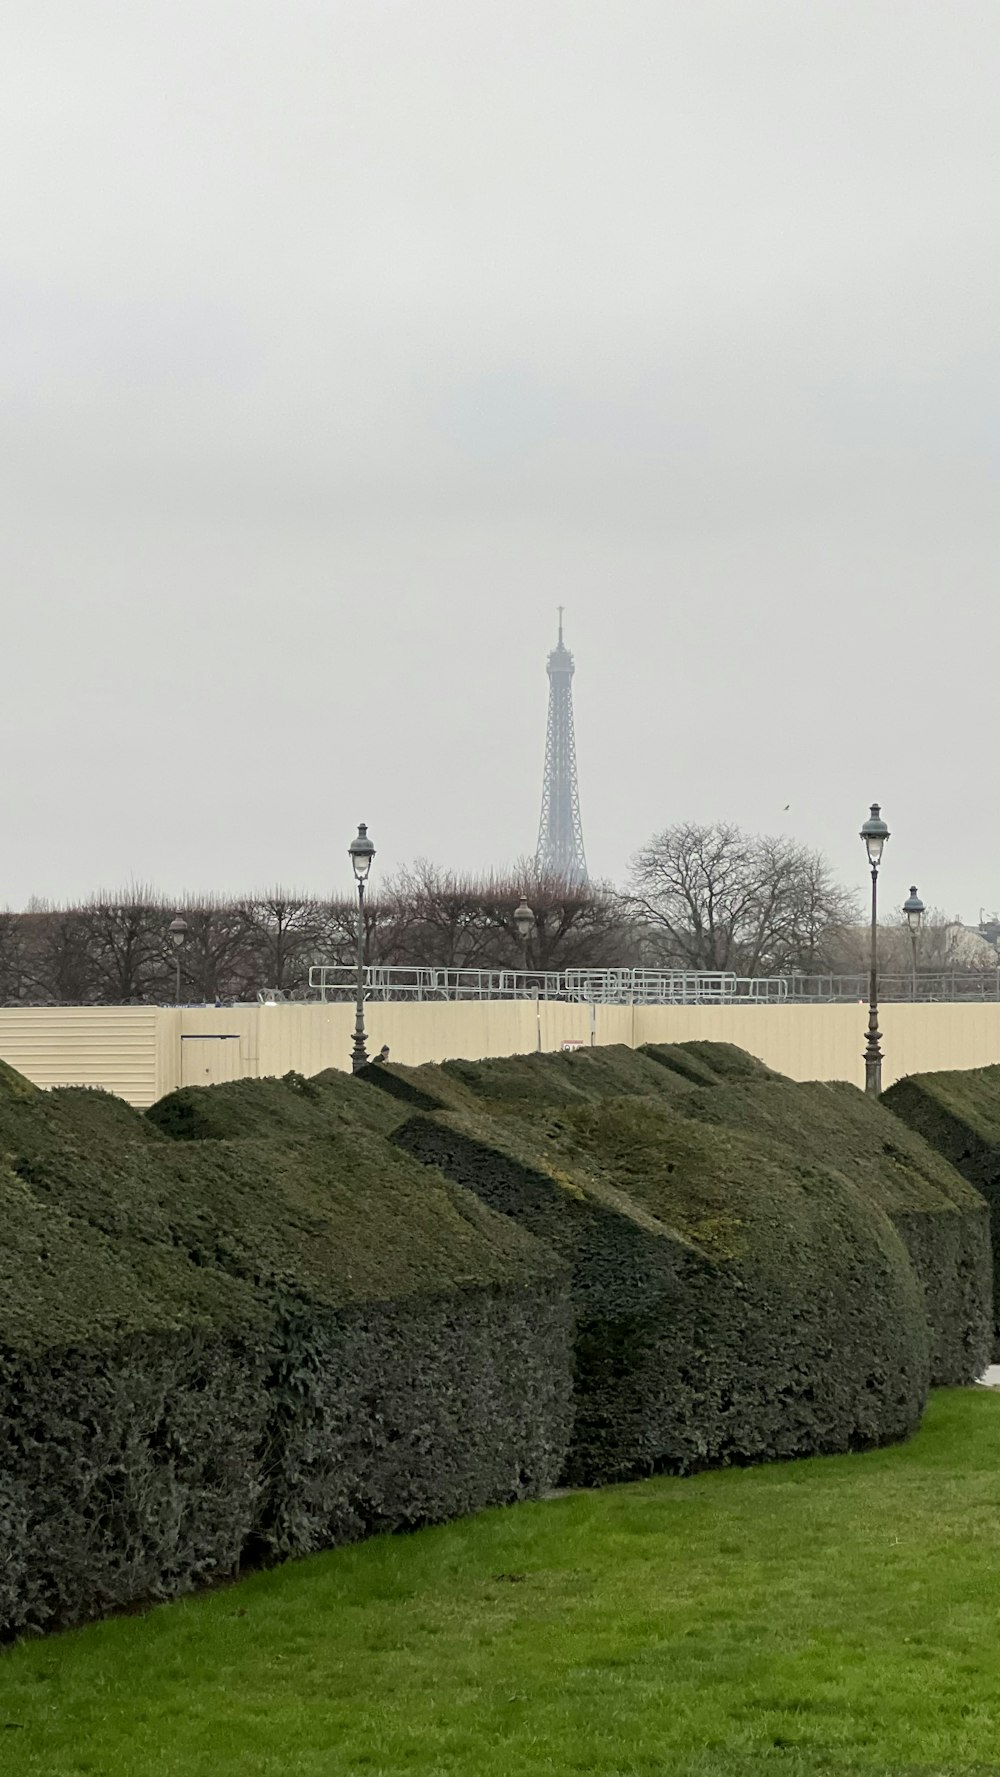 a row of hedges with a view of the eiffel tower in the background